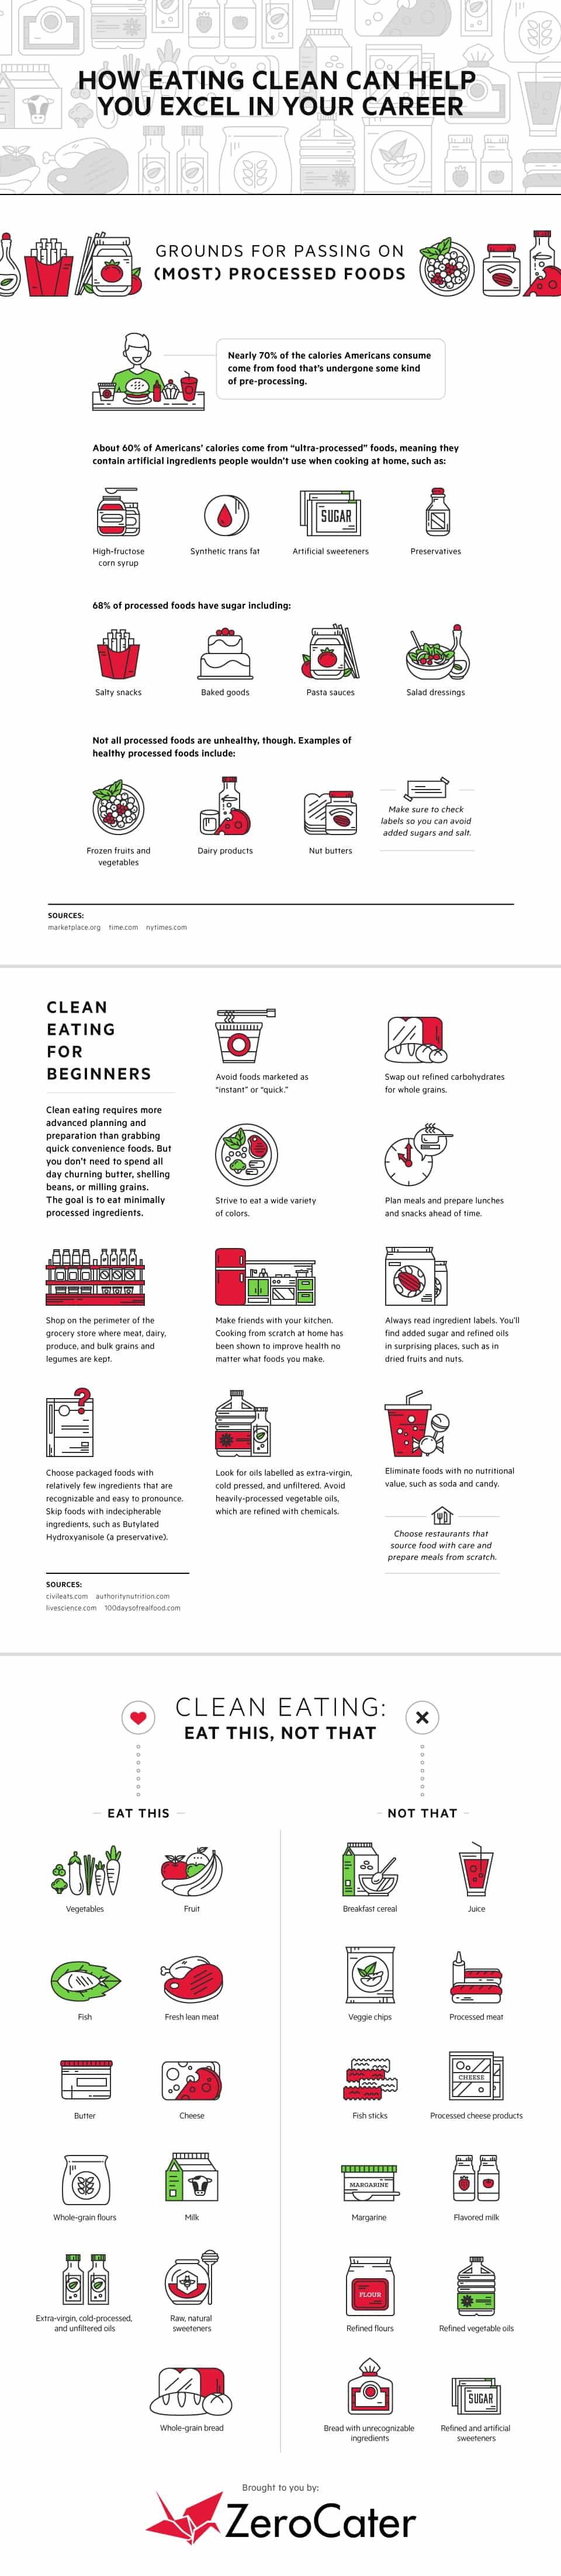 How Eating Clean Can Help You Excel in Your Career InfoGraphics